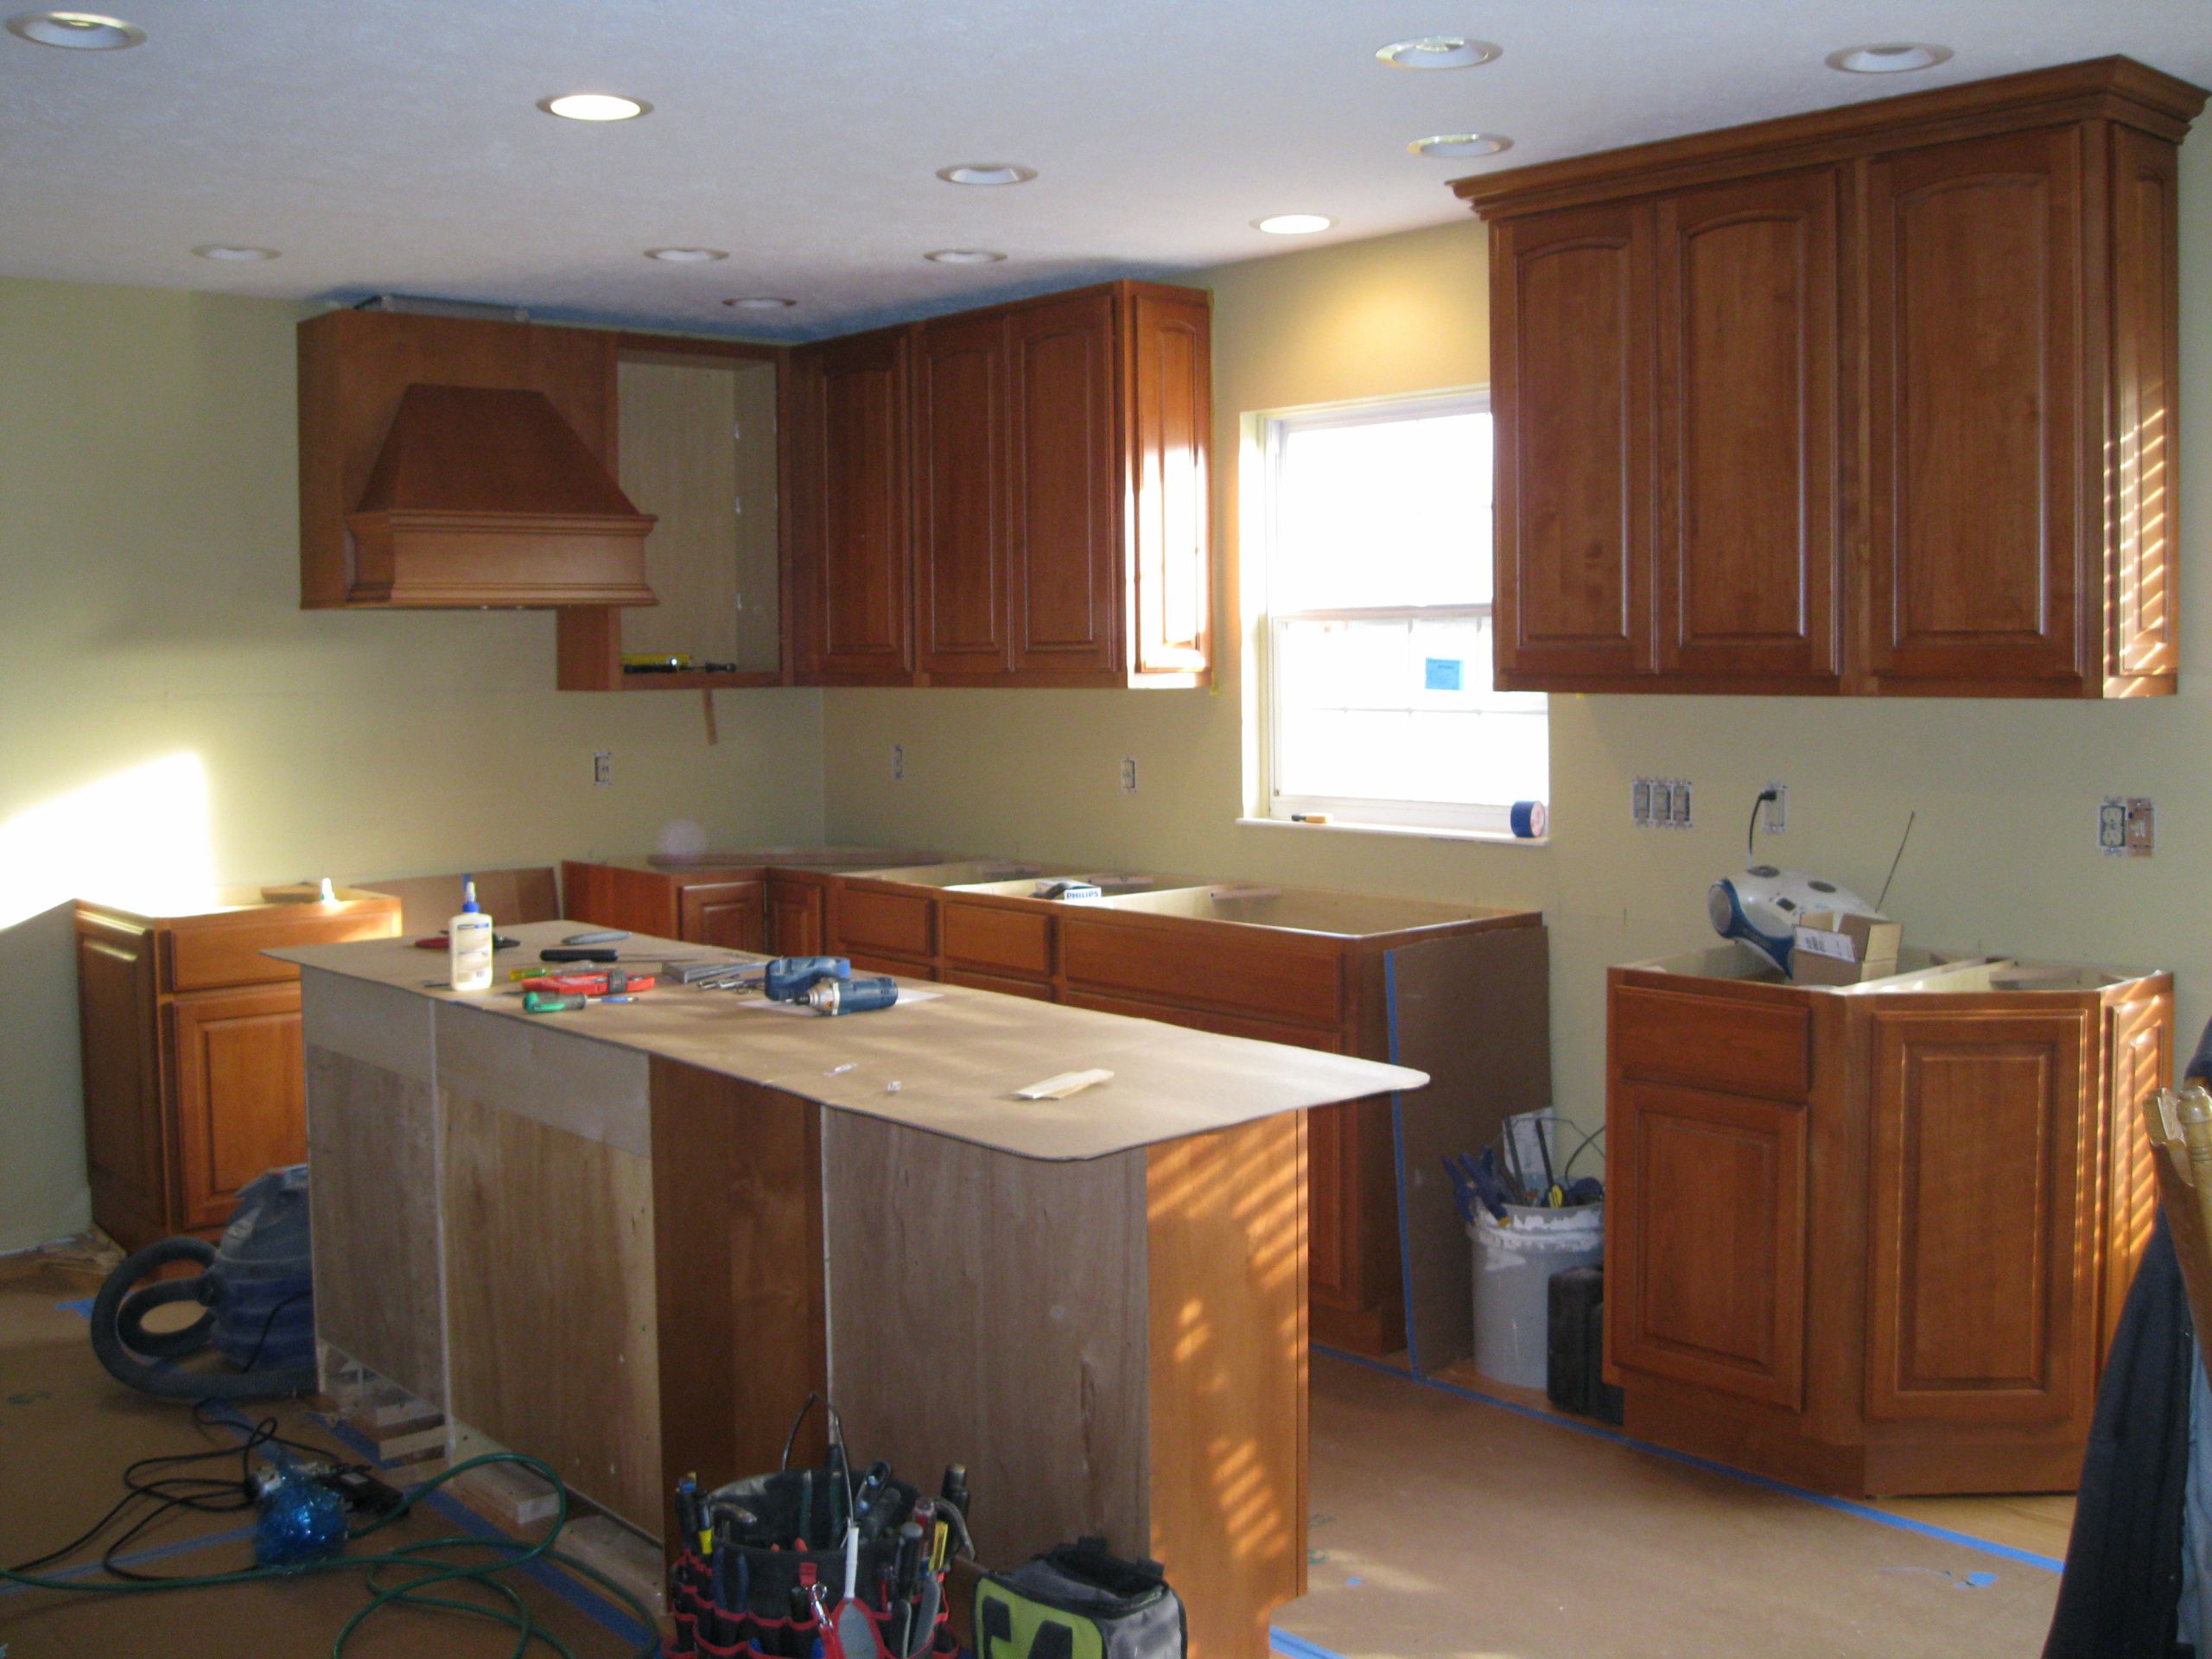 Wall Cabinet Kitchen
 West Chester Kitchen fice Wall Cabinets Remodeling